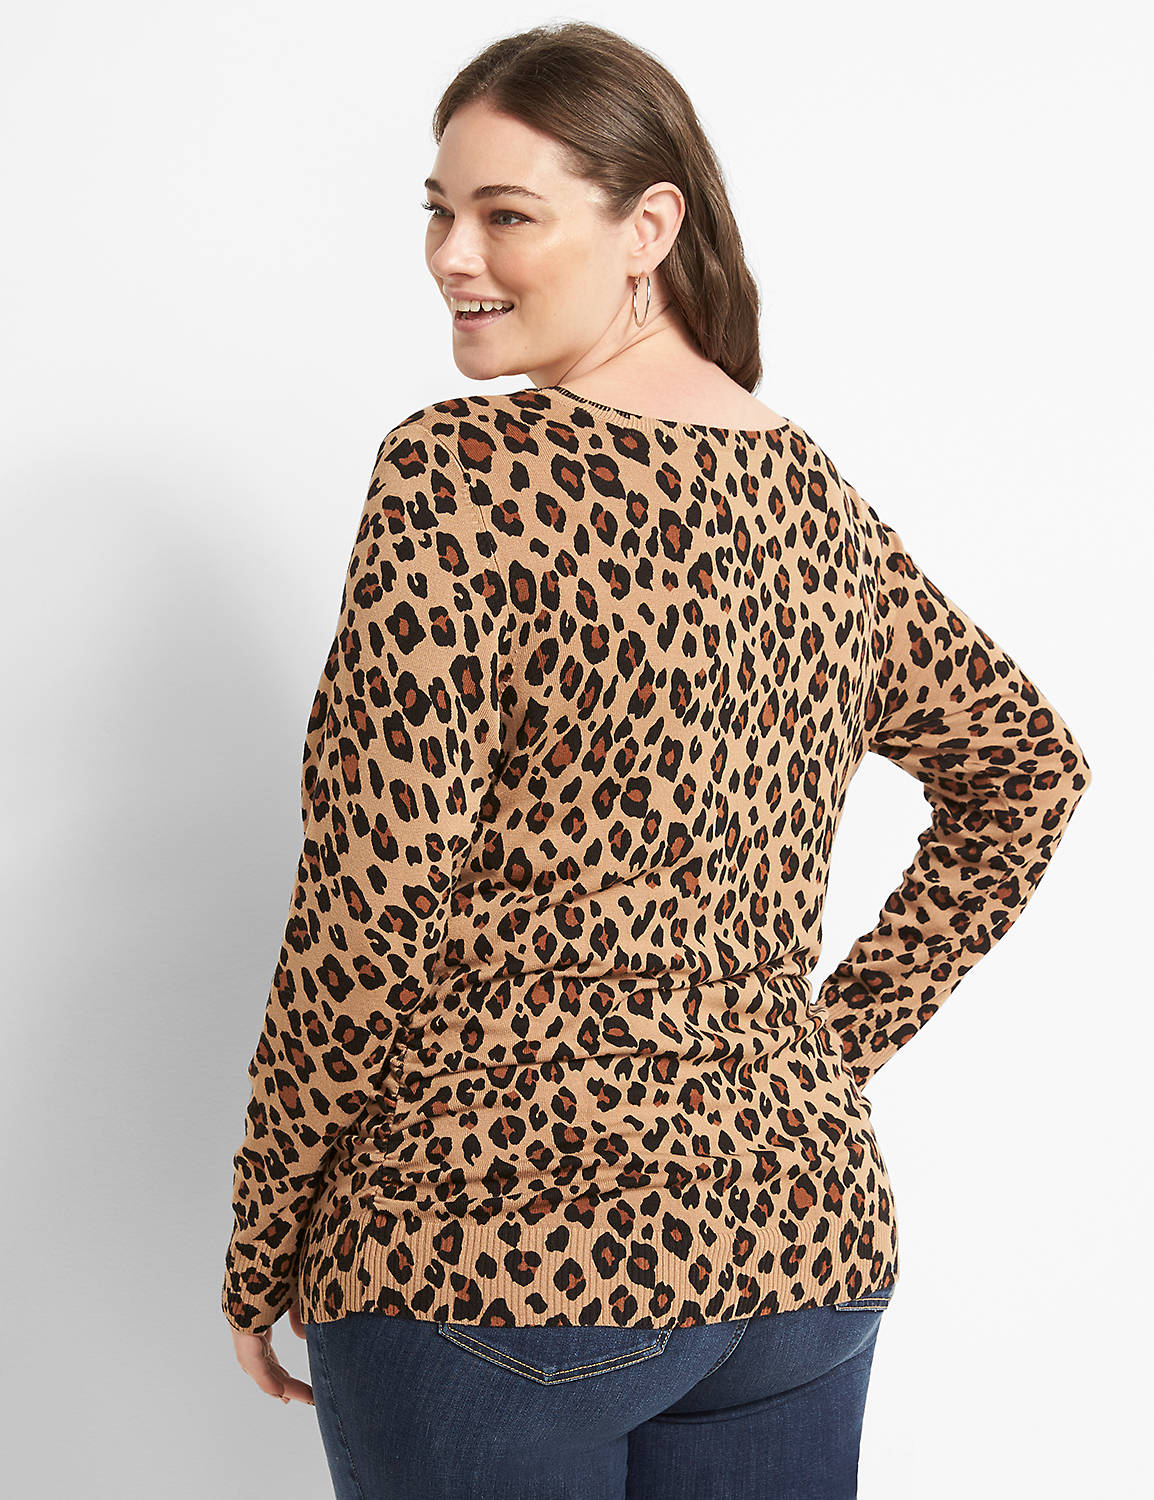 Ruched-Side Sweater - Leopard Product Image 2